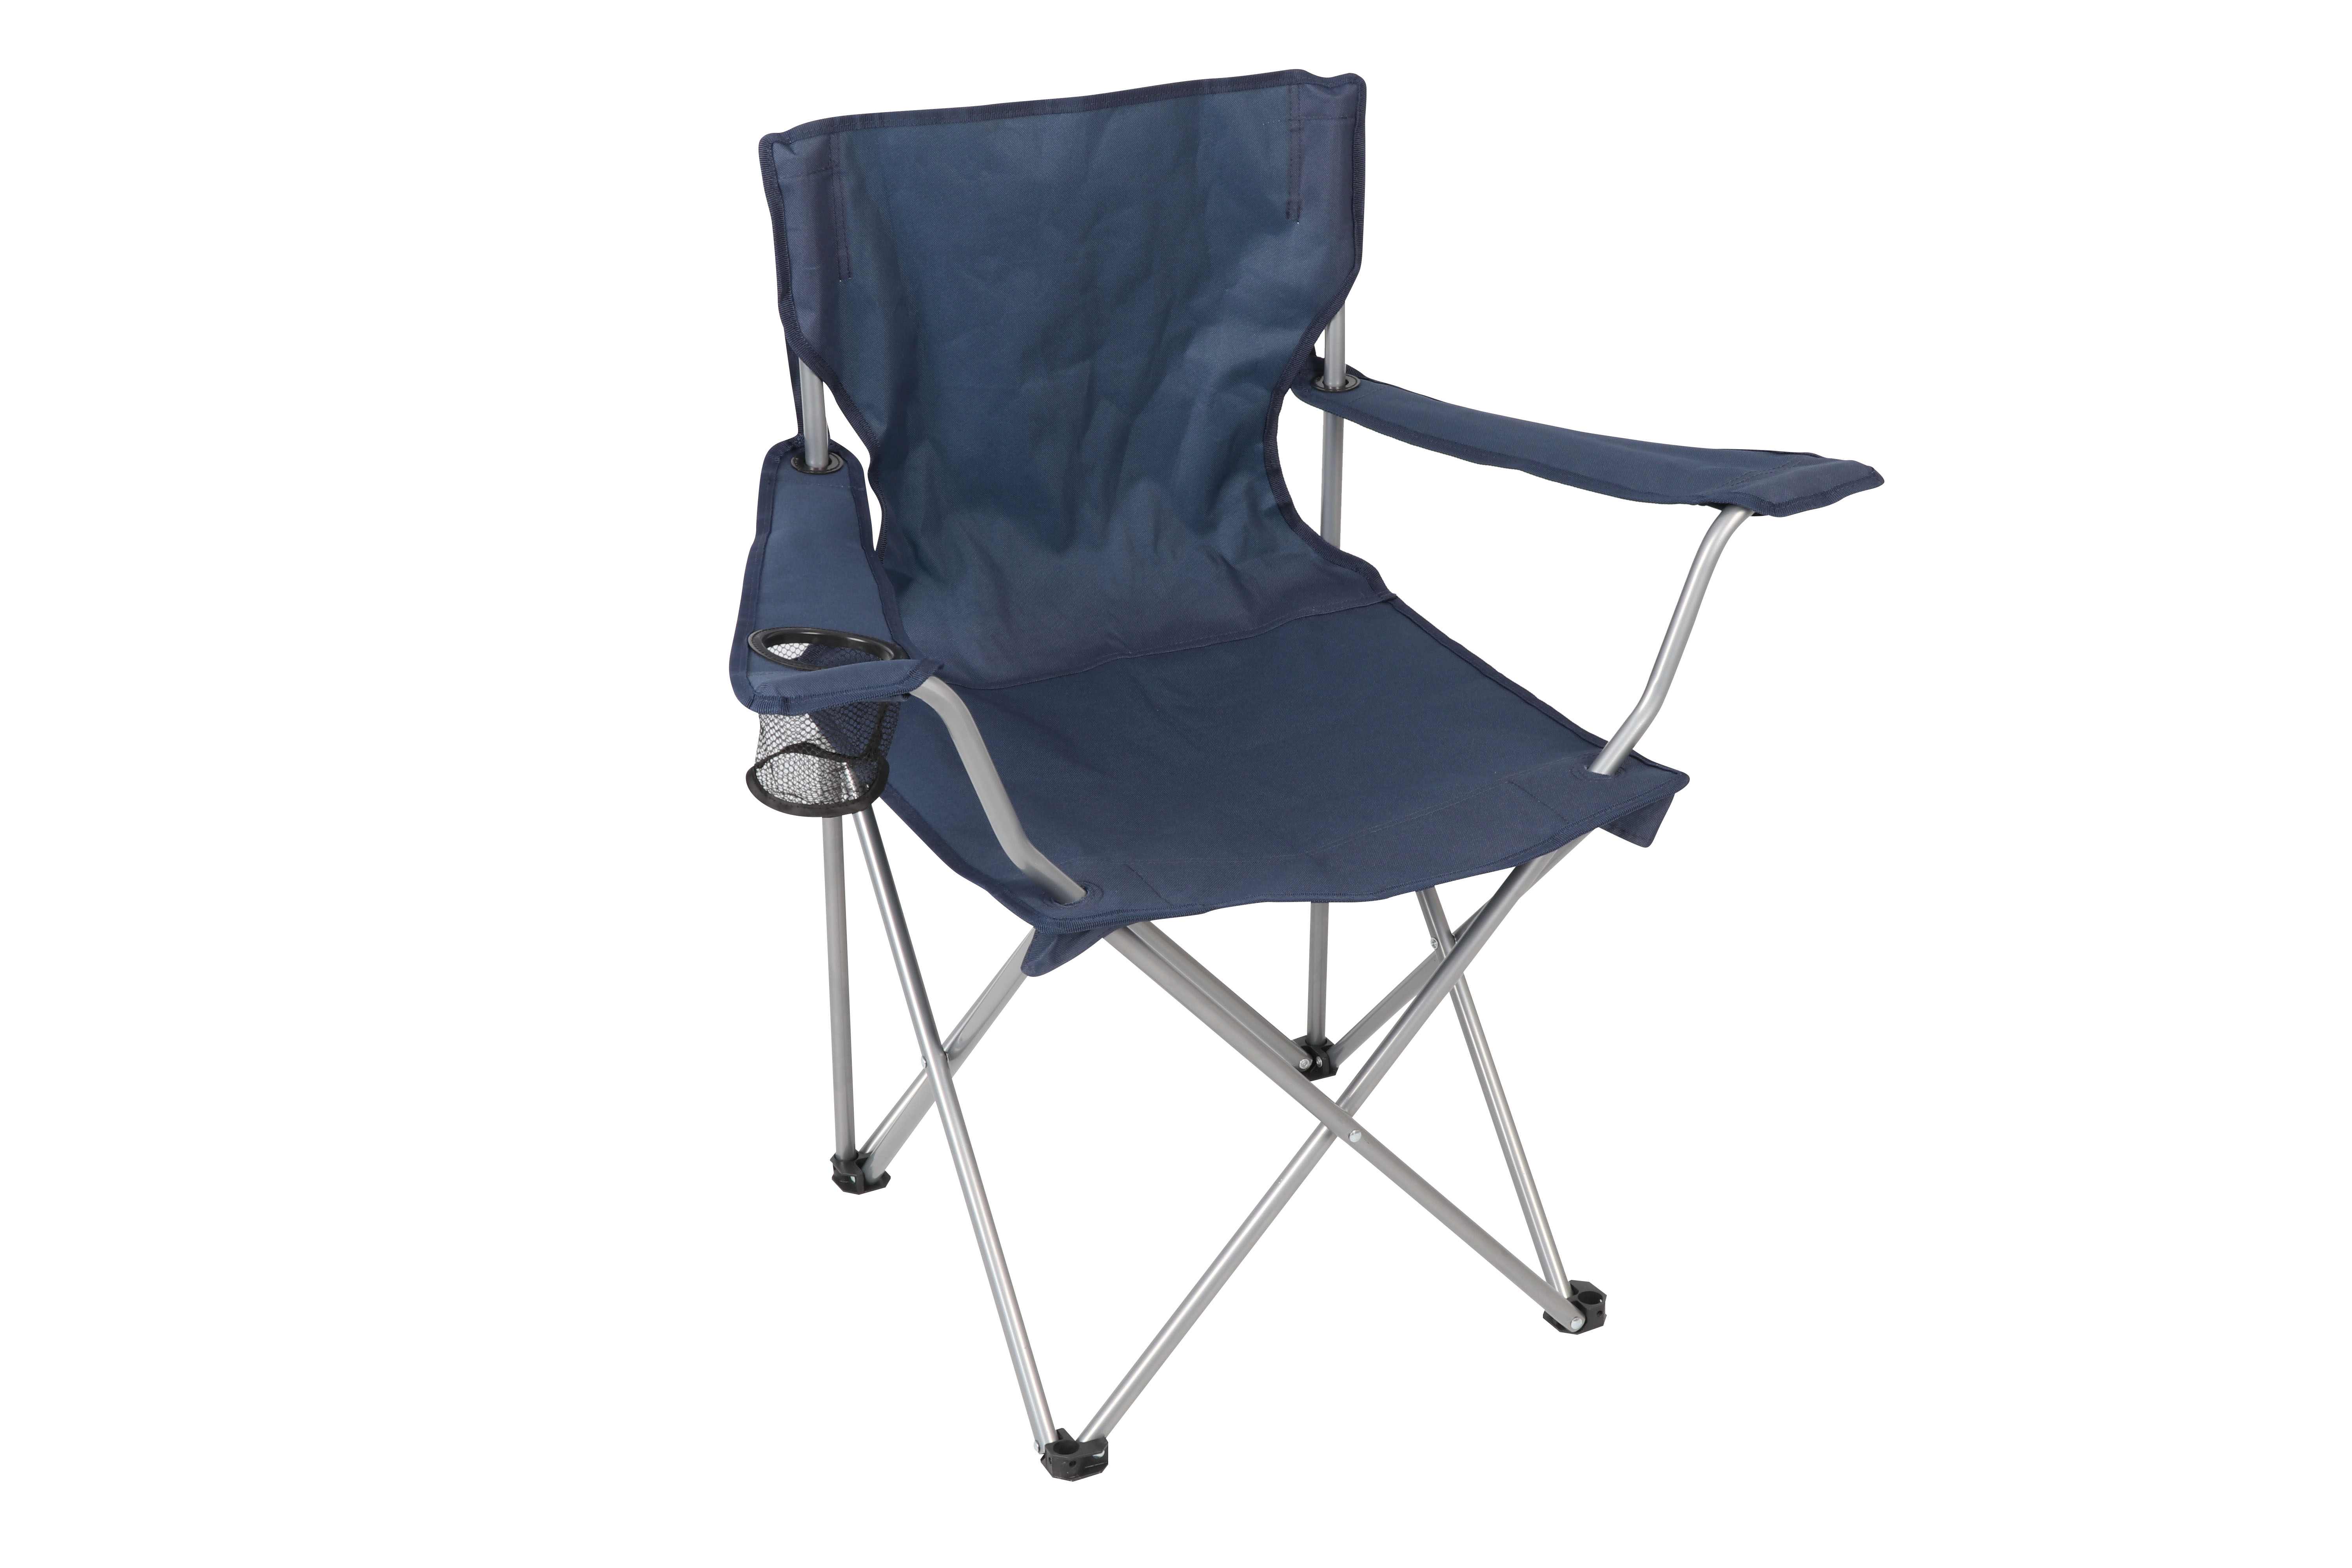 Ozark Trail Camping Chair, Blue, 4 and Half Pounds - image 2 of 13